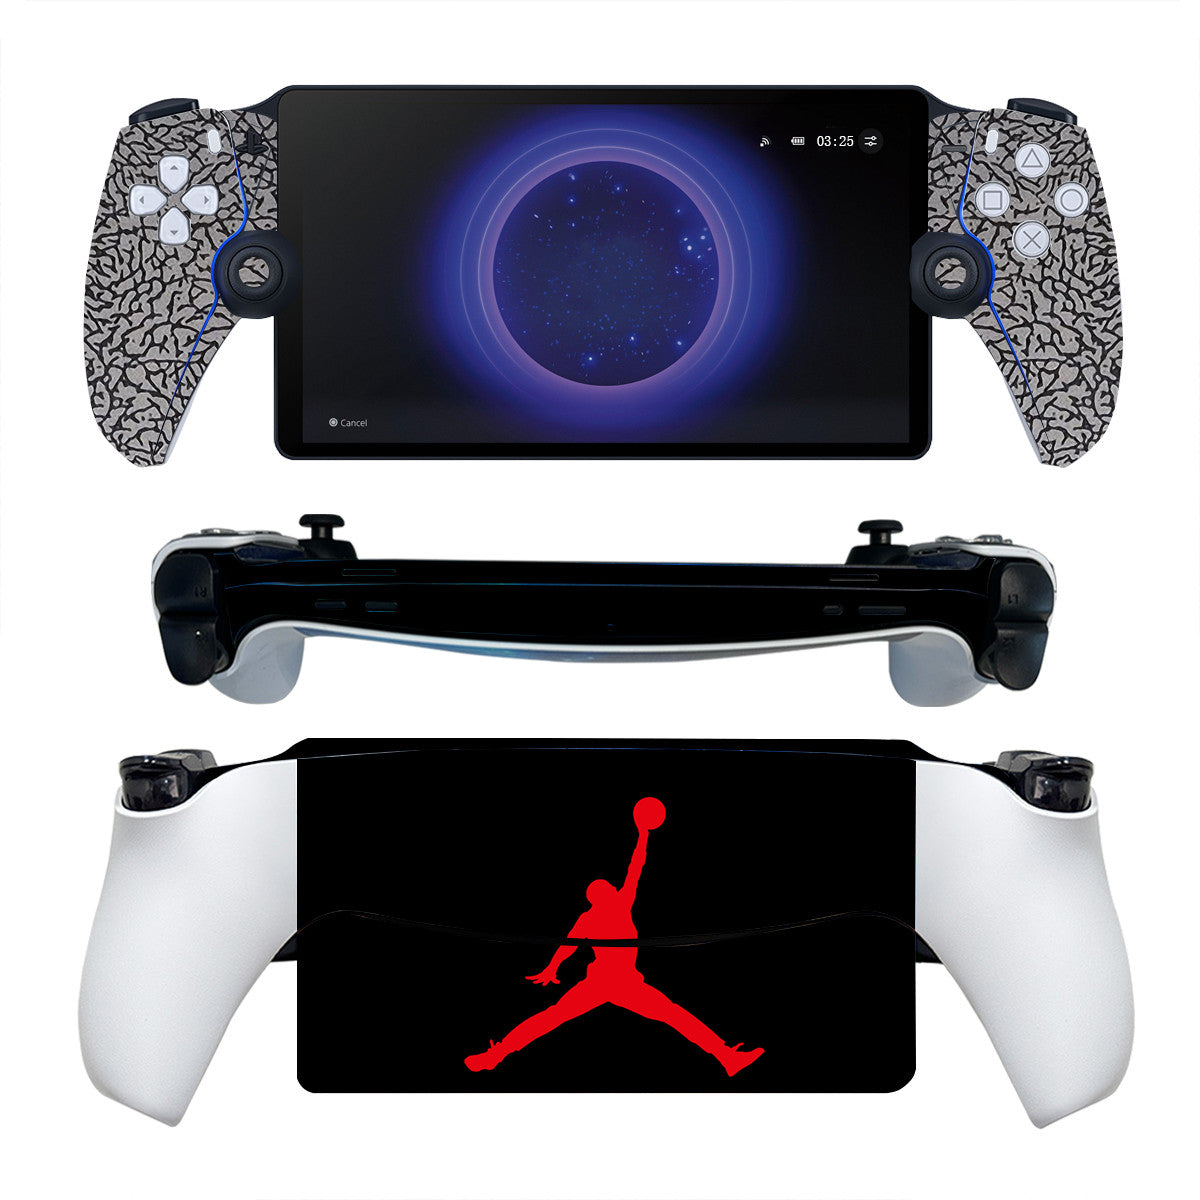 Air Jordan PlayStation Skin: Soar into gaming greatness with this exclusive Portal Protector design inspired by iconic sneaker culture.